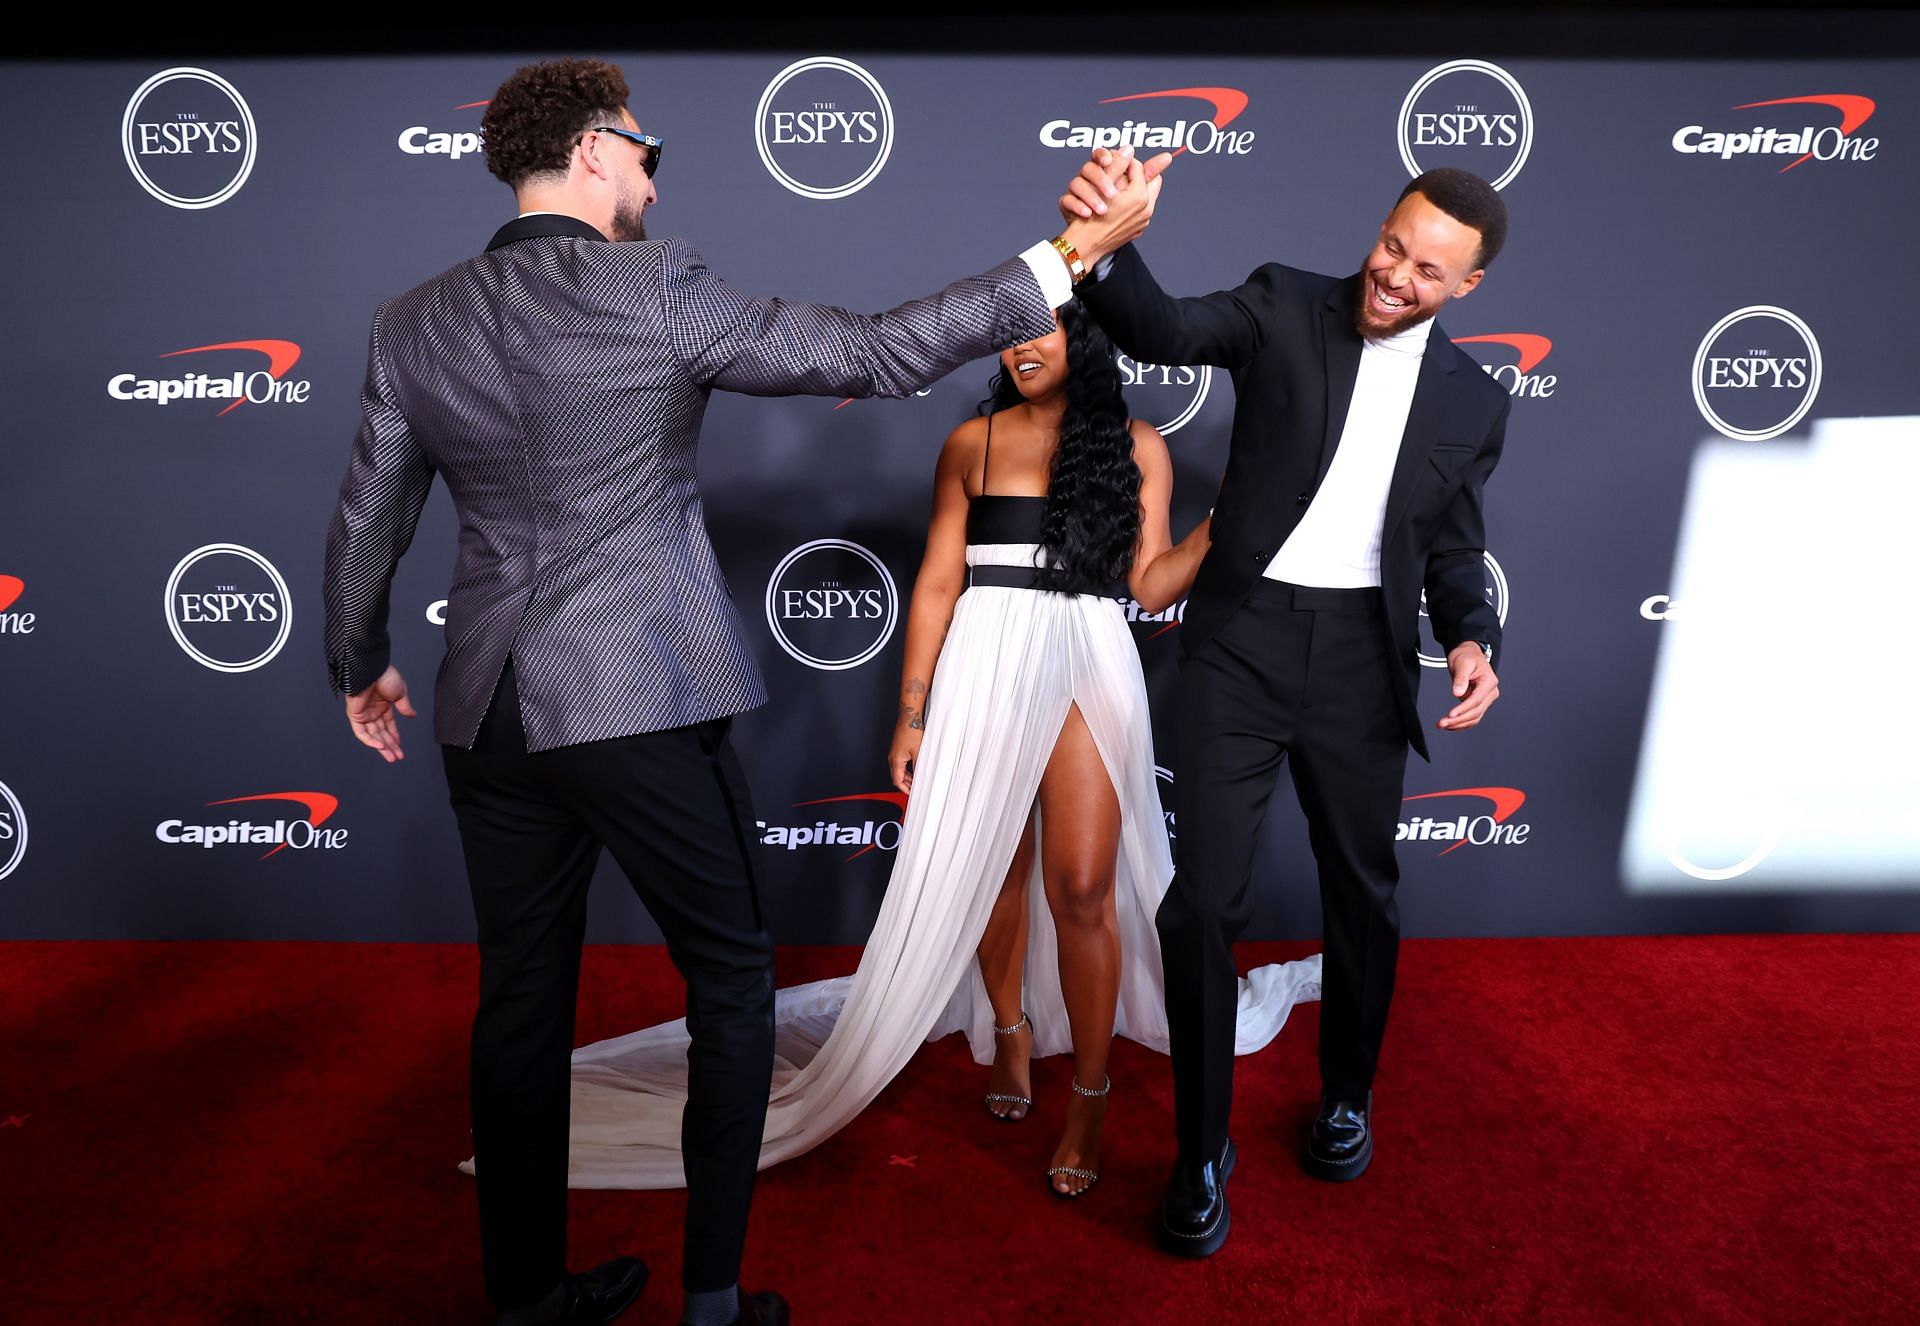 Steph Curry with Ayesha Curry and Klay Thompson at the ESPYS